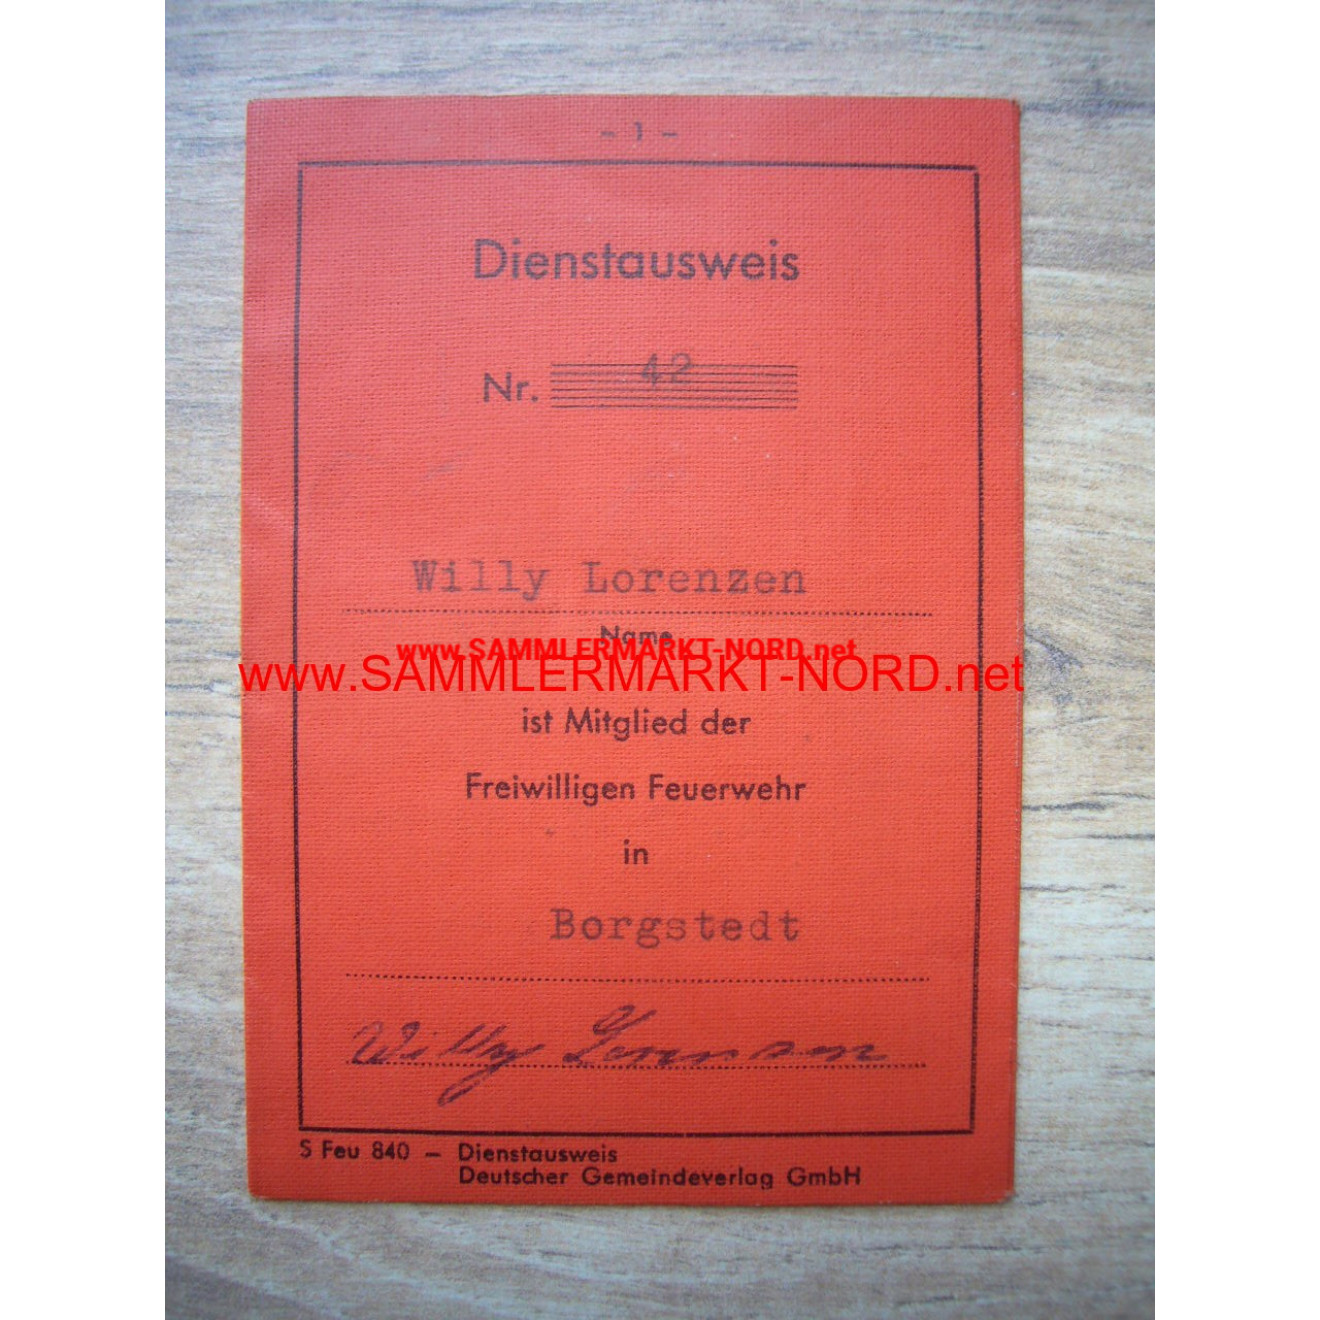 Volunteer Fire Department Borgstedt - ID Card